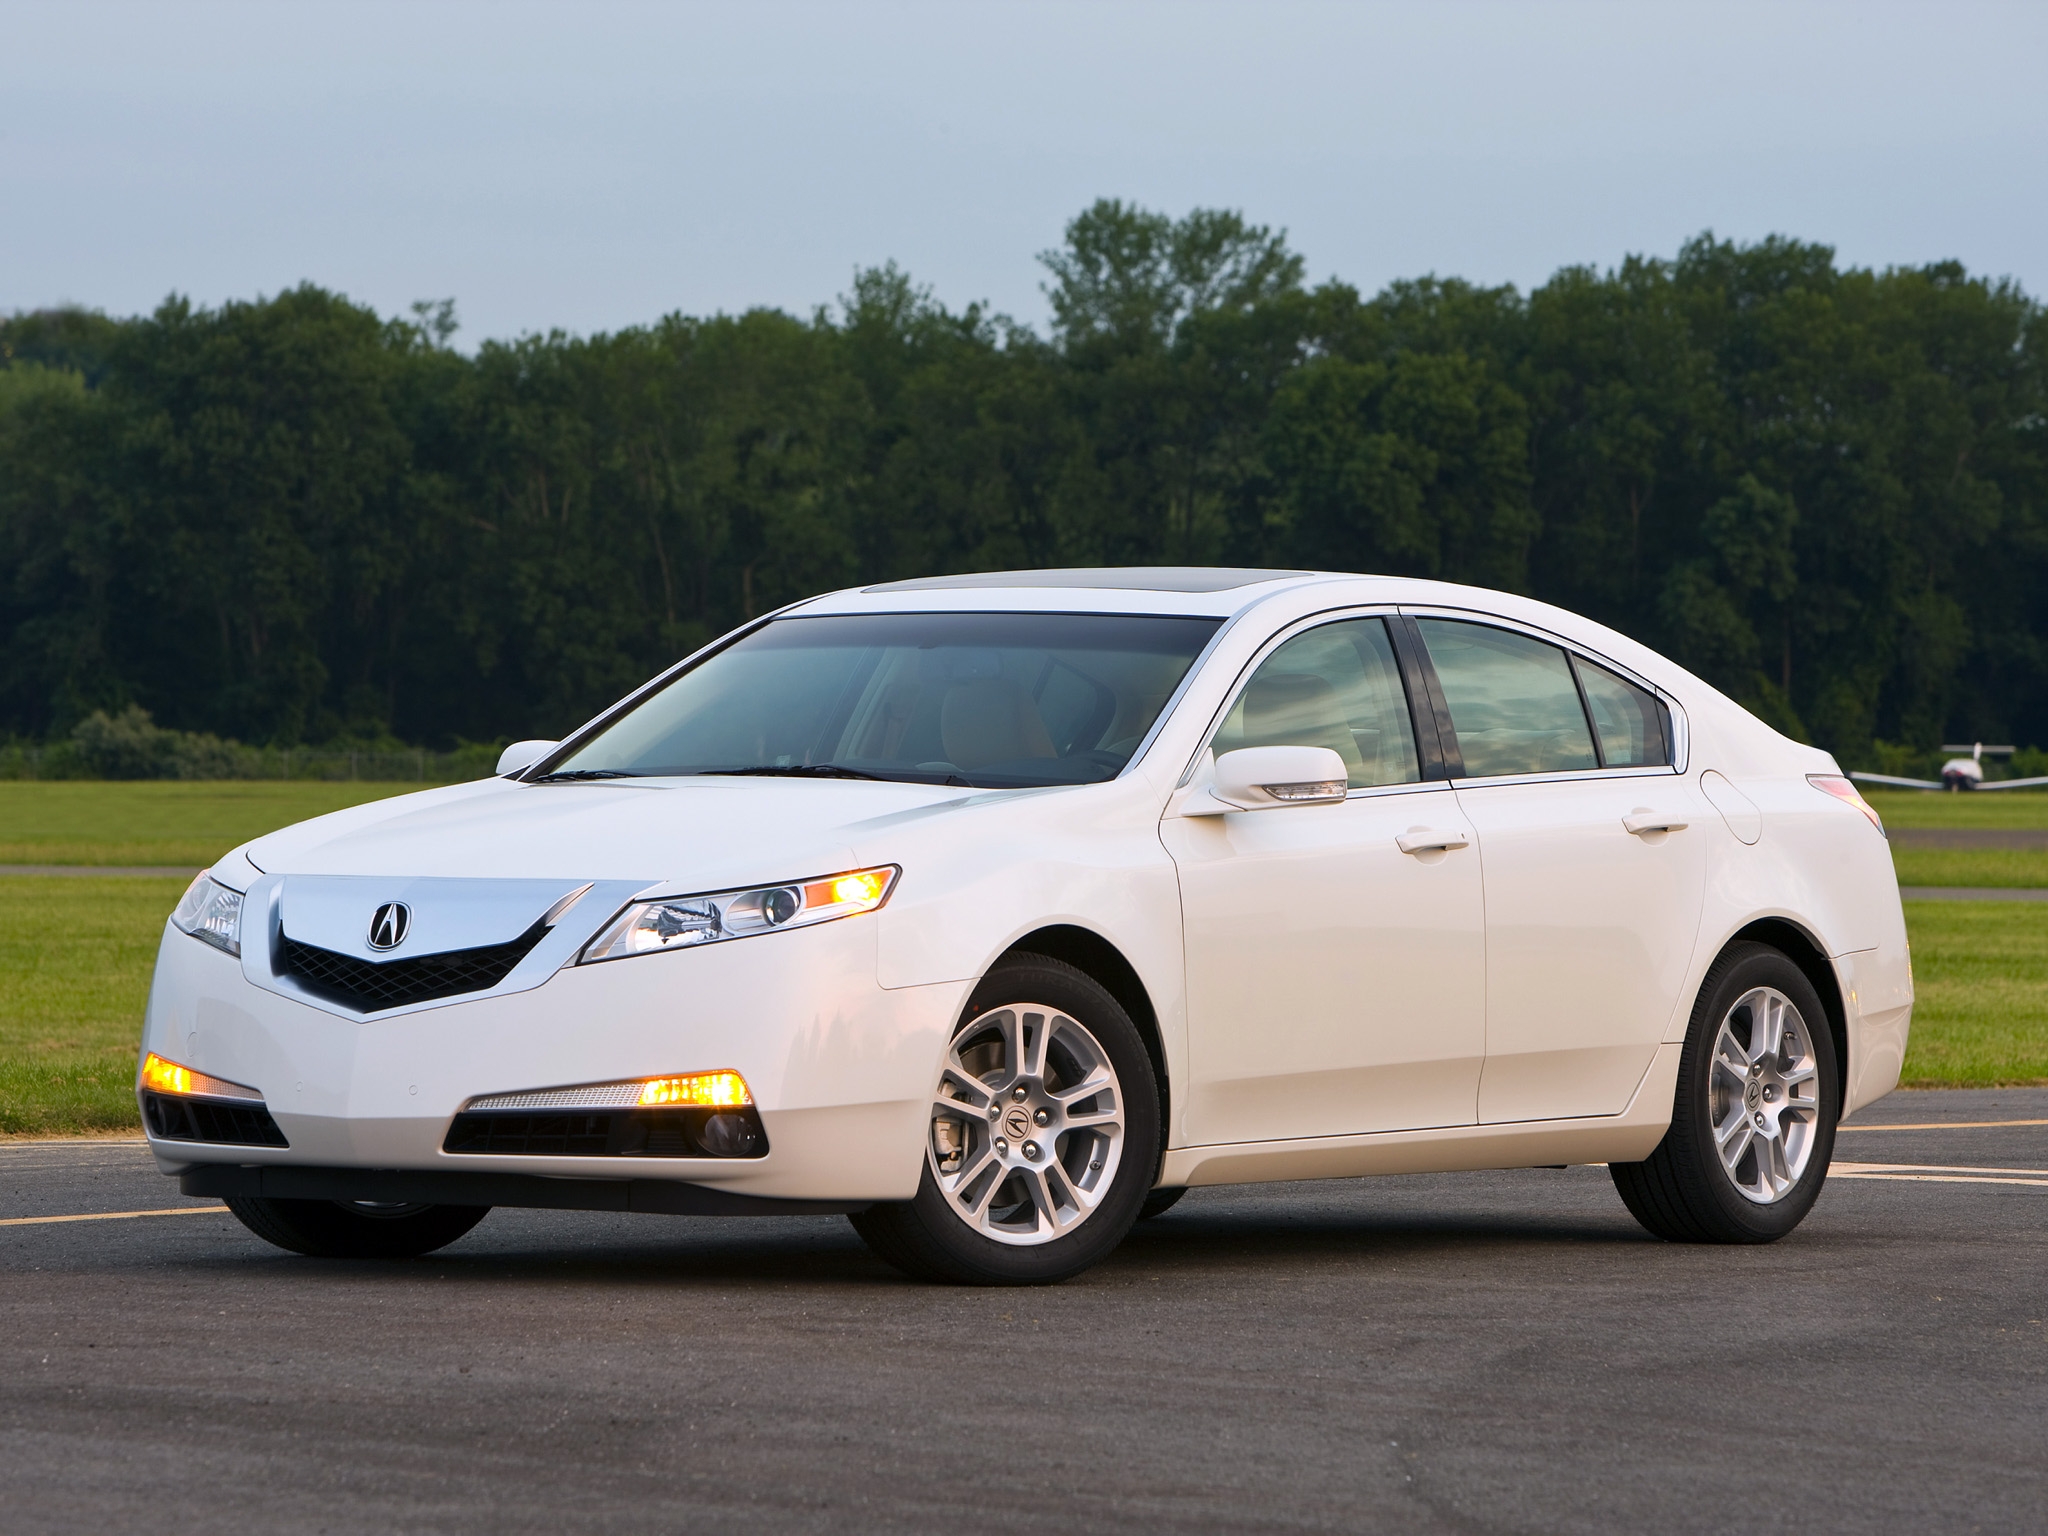 cars, auto, nature, trees, grass, acura, white, side view, style, akura, 2008, tl 4K